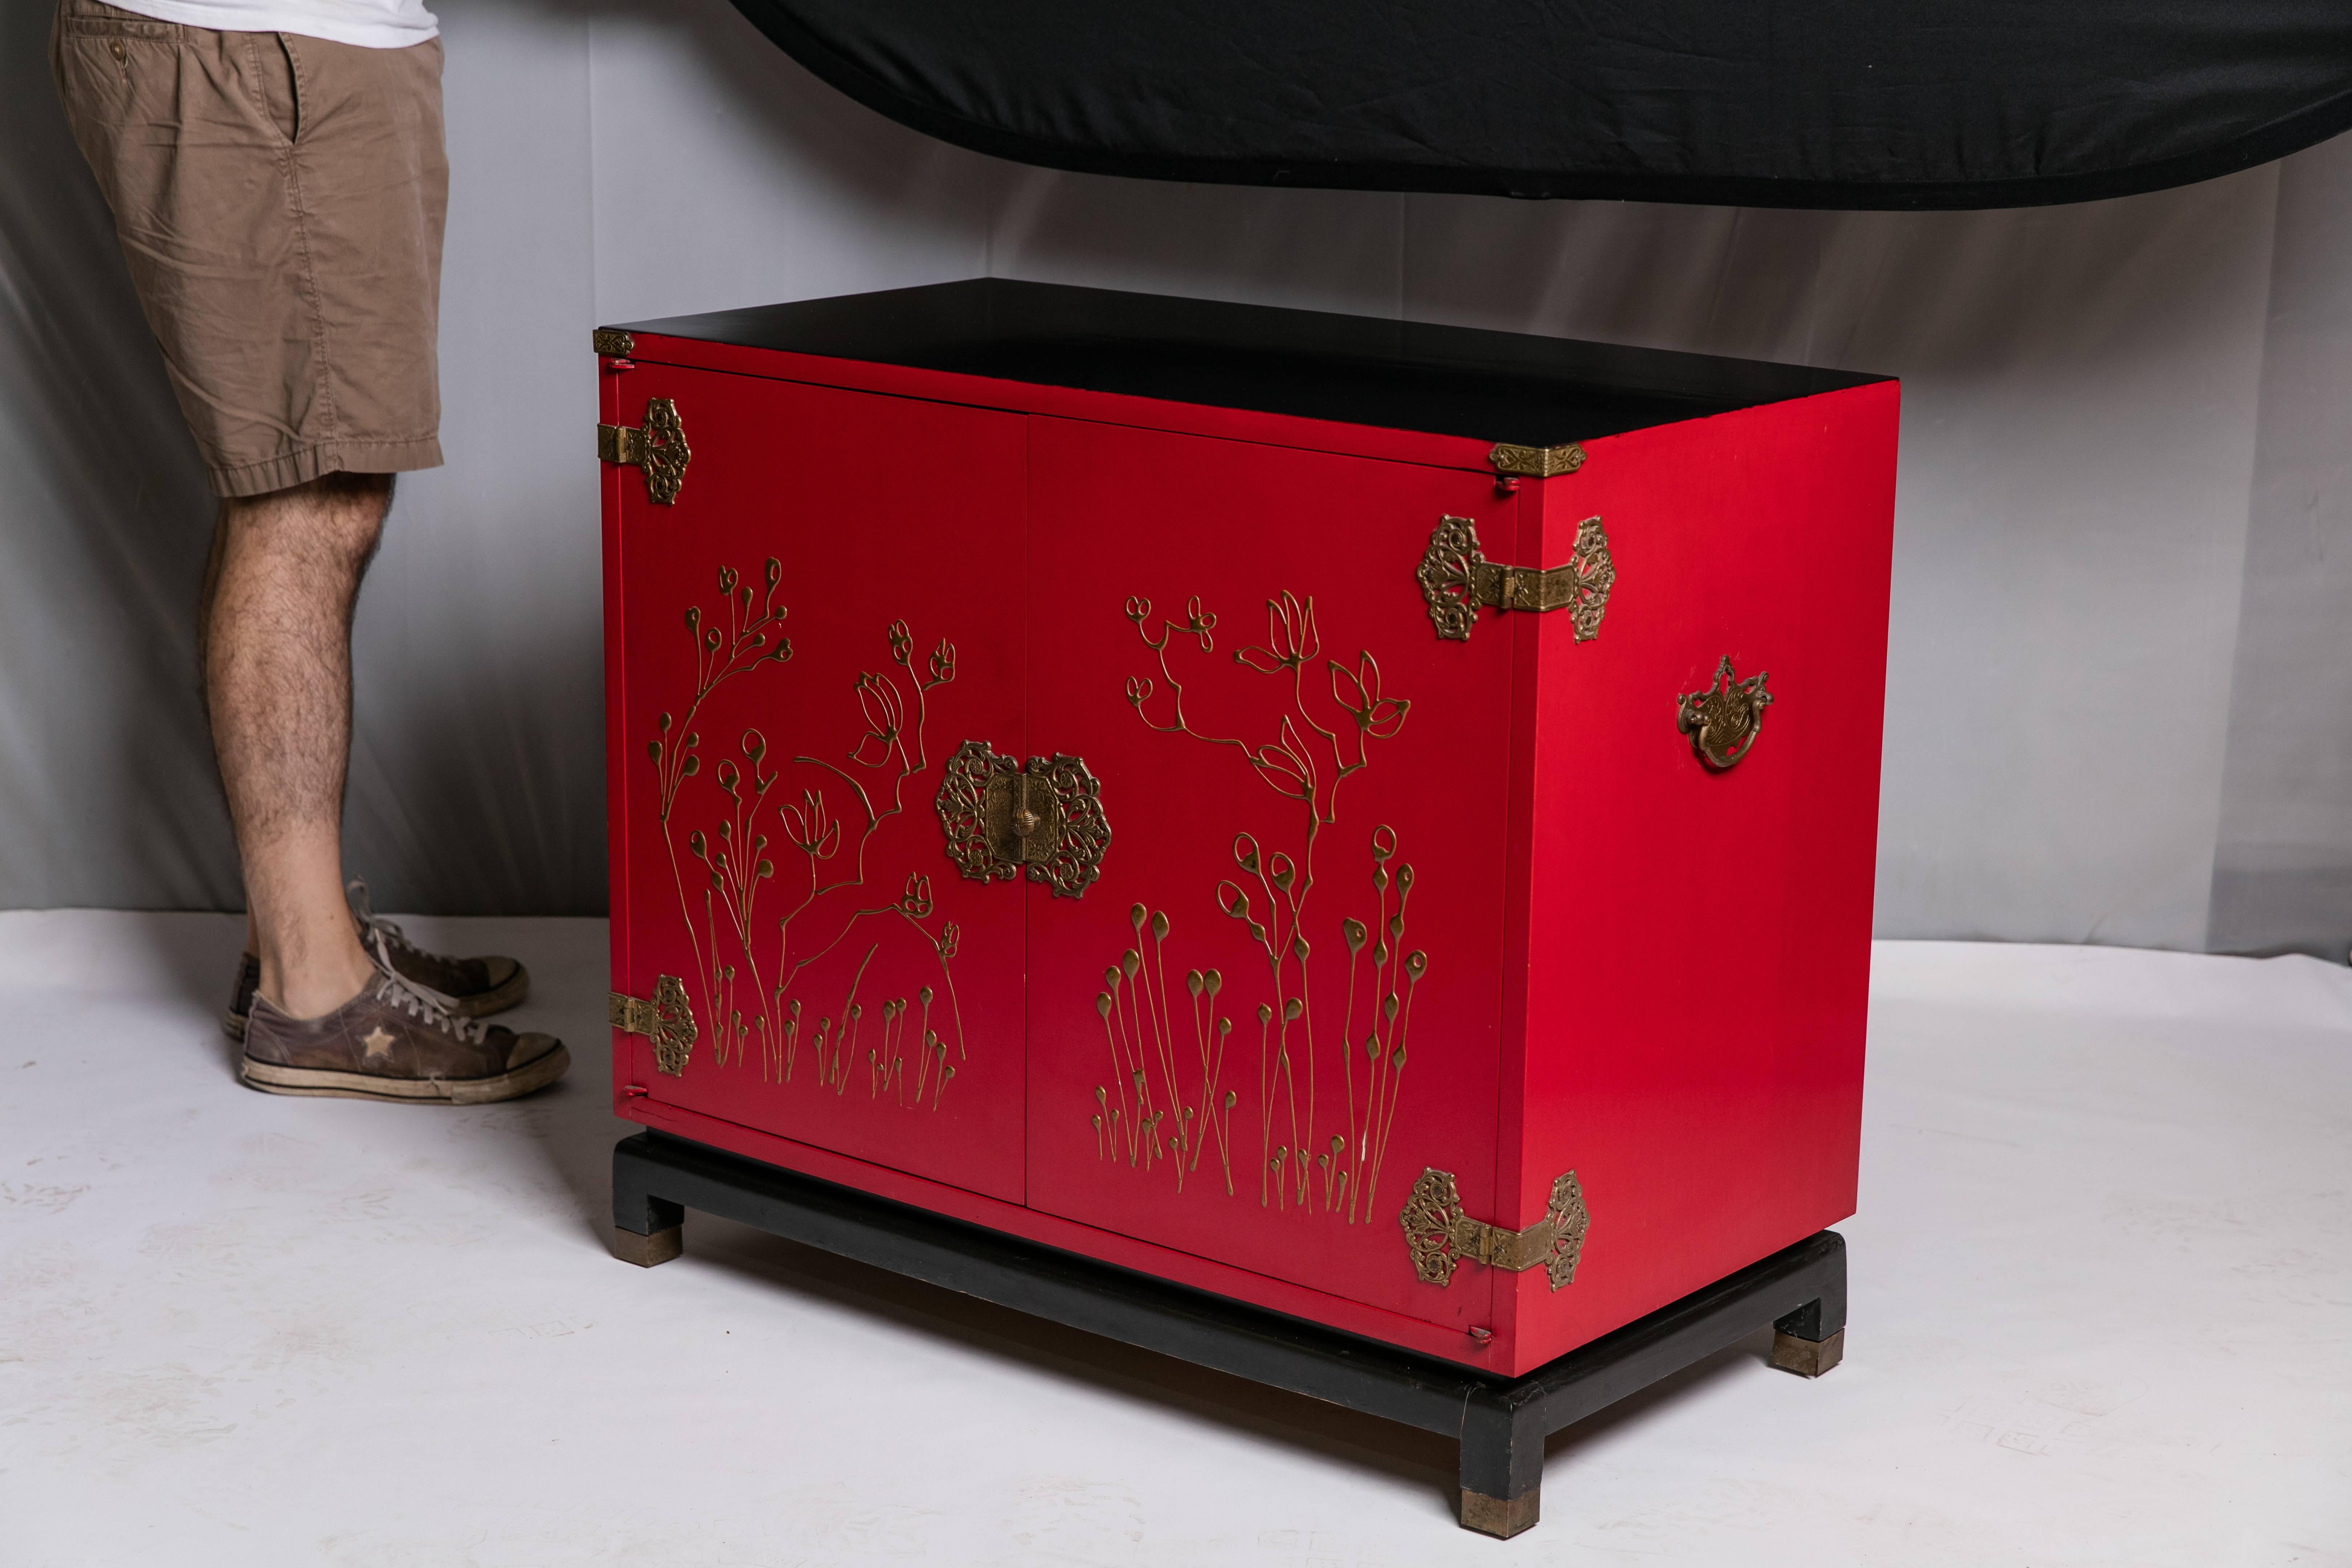 A stunning red Mid-Century wood chinoiserie bar cabinet by Bass. Styled to resemble a Chinese tea chest, the bar's red cabinet rests on raised black lacquered legs. The black top is protected by a piece of glass. The face of each door is embellished